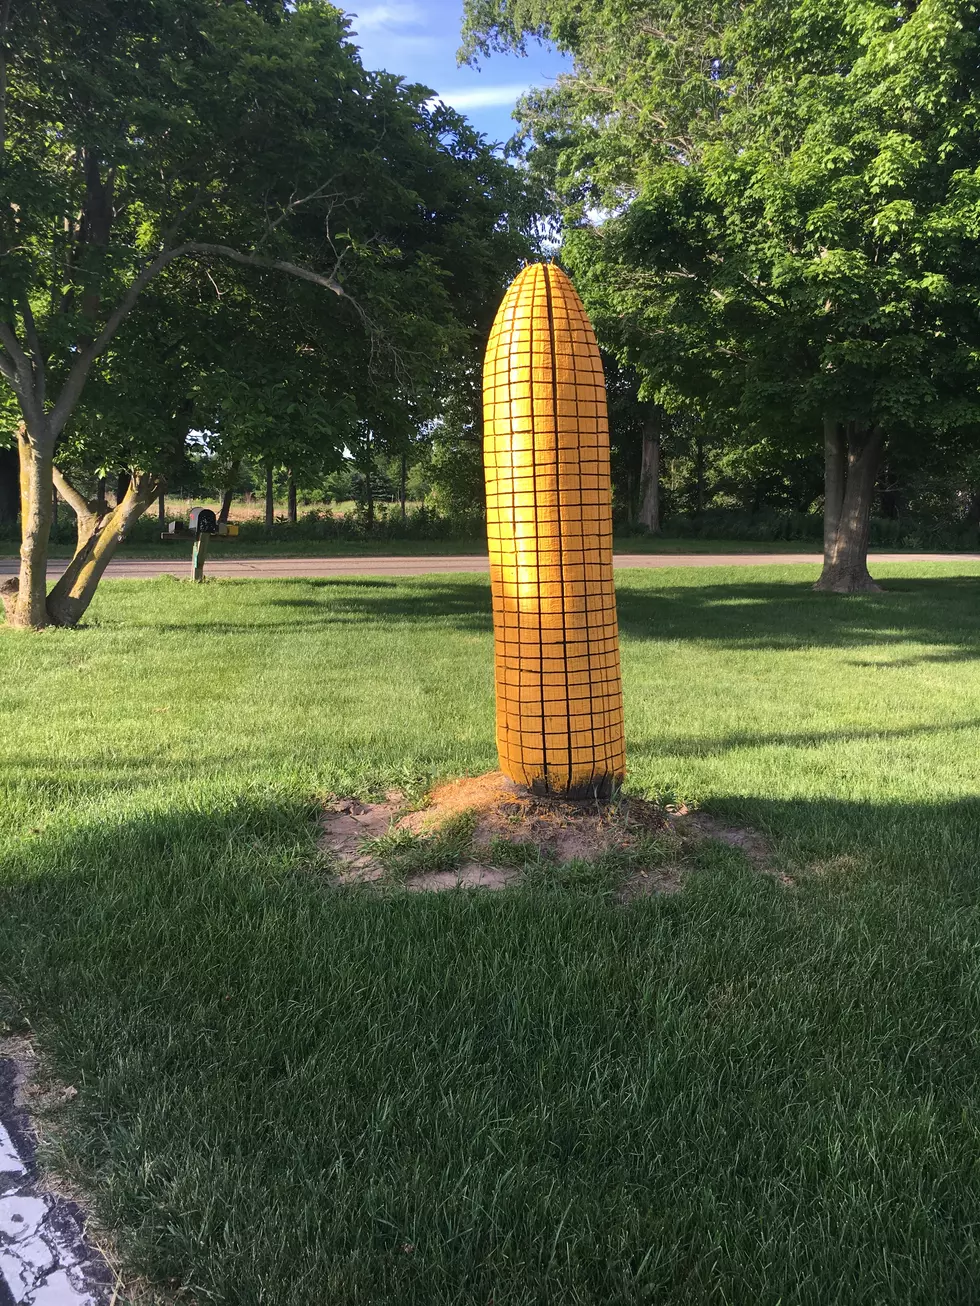 Surprising Things You Drive By in Michigan